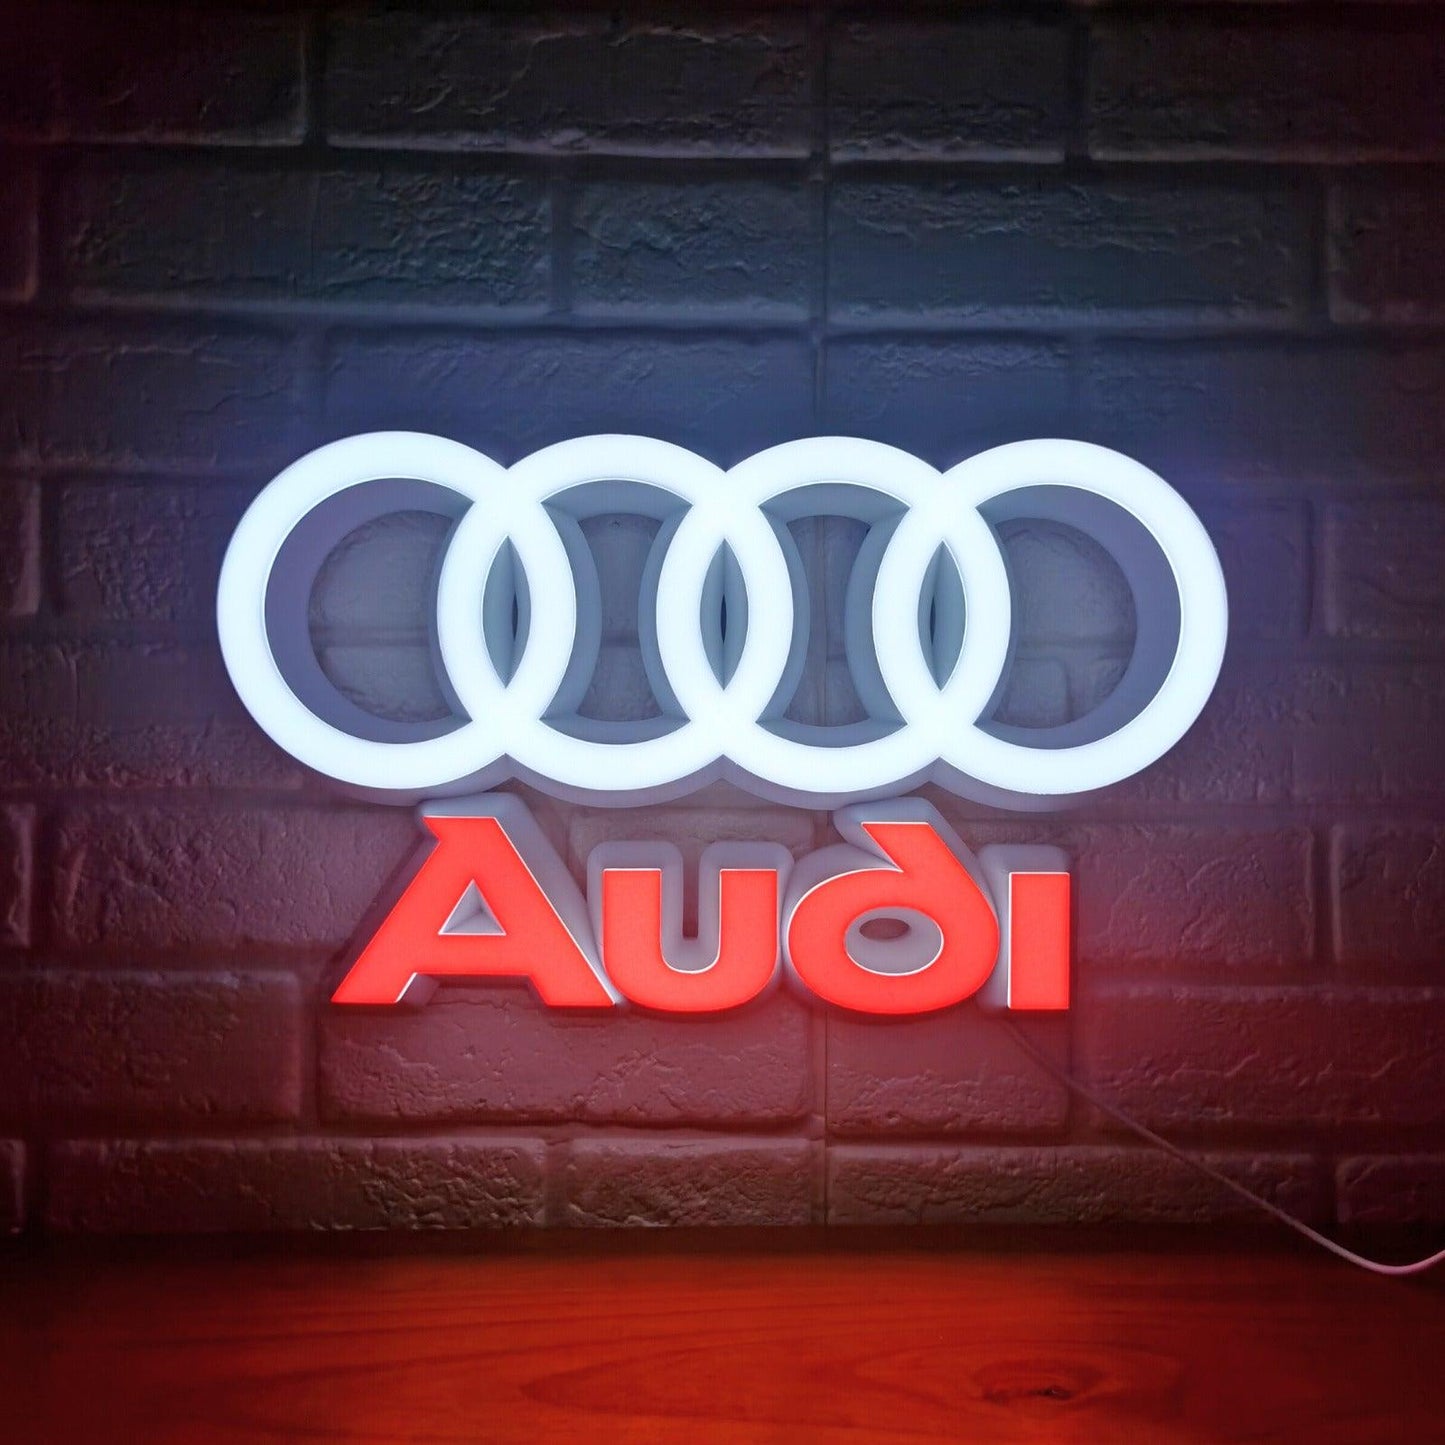 Audi LED Logo Lamp High-Quality Car Decor Great Gift for Audi Enthusiasts - FYLZGO Signs